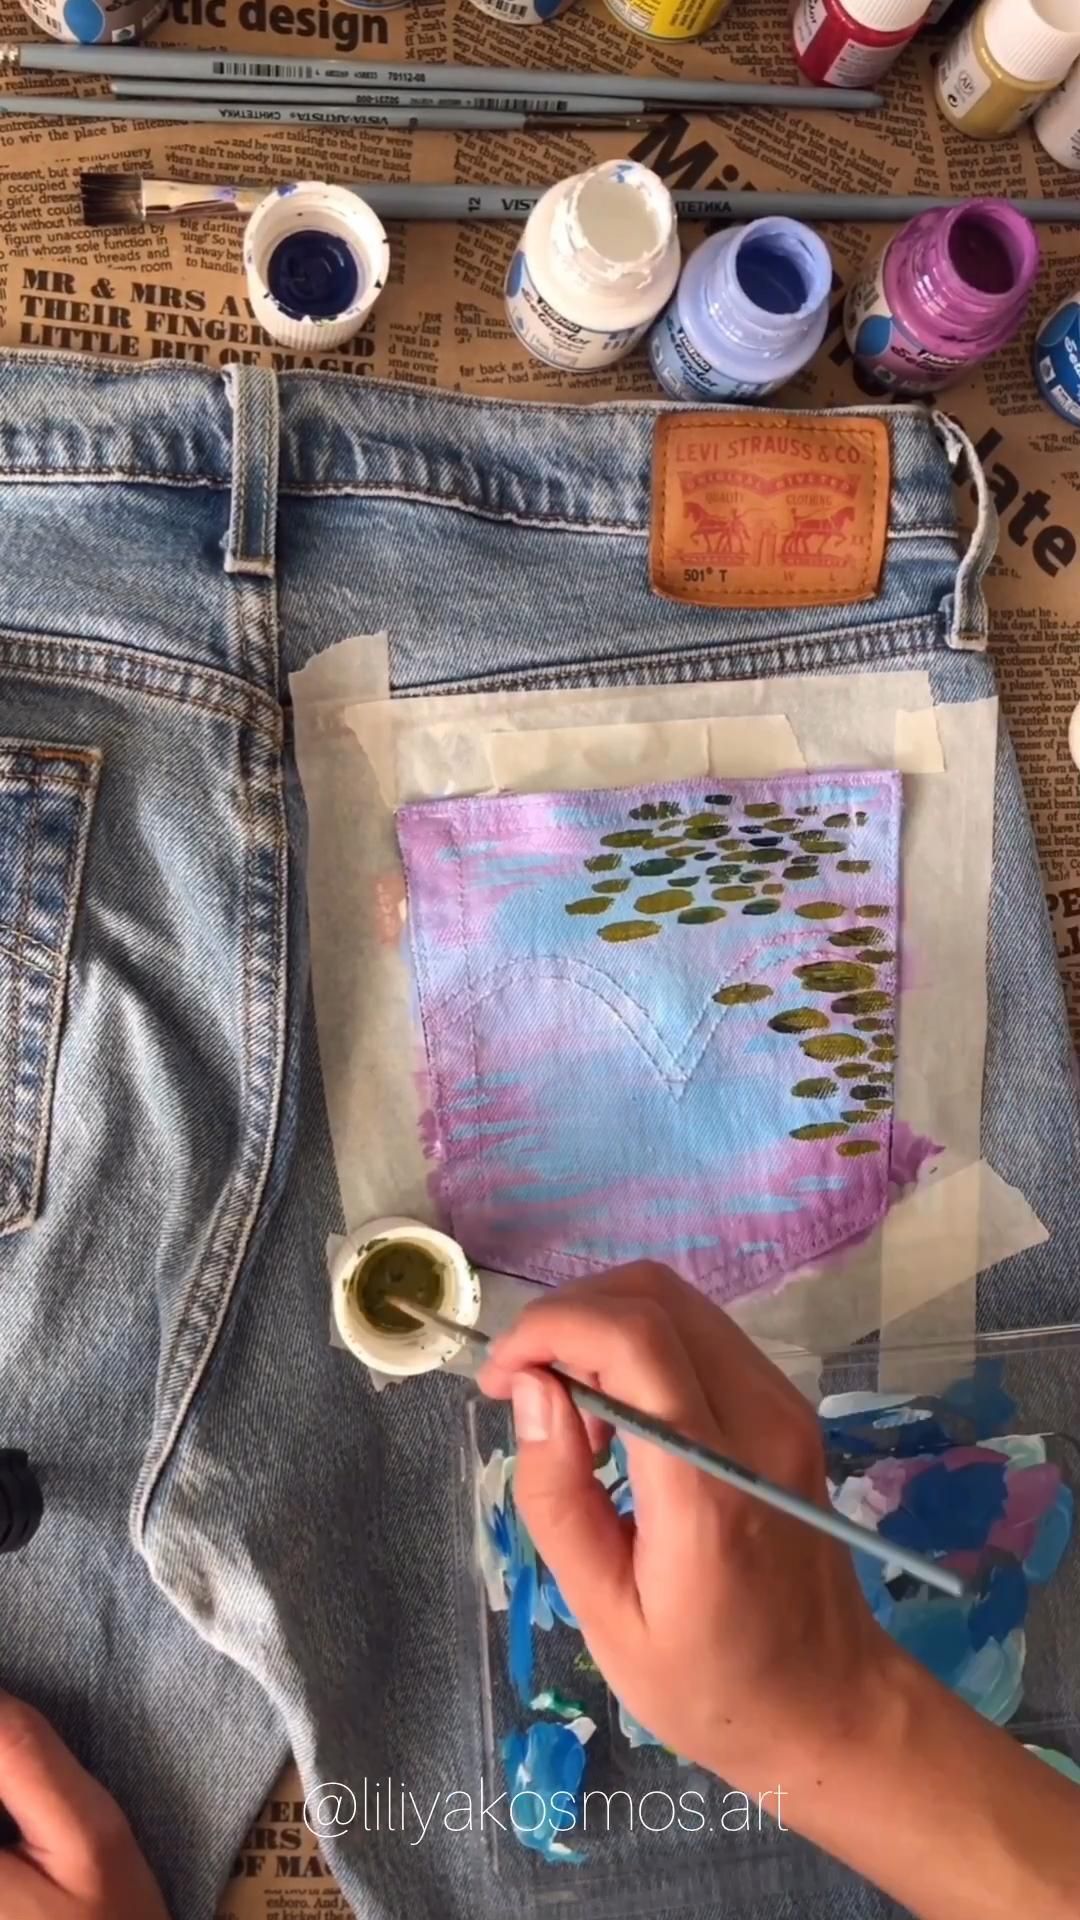 Hand painted jeans pocket Monet Waterlilies jean price Not | Etsy - Hand painted jeans pocket Monet Waterlilies jean price Not | Etsy -   diy Clothes crafts